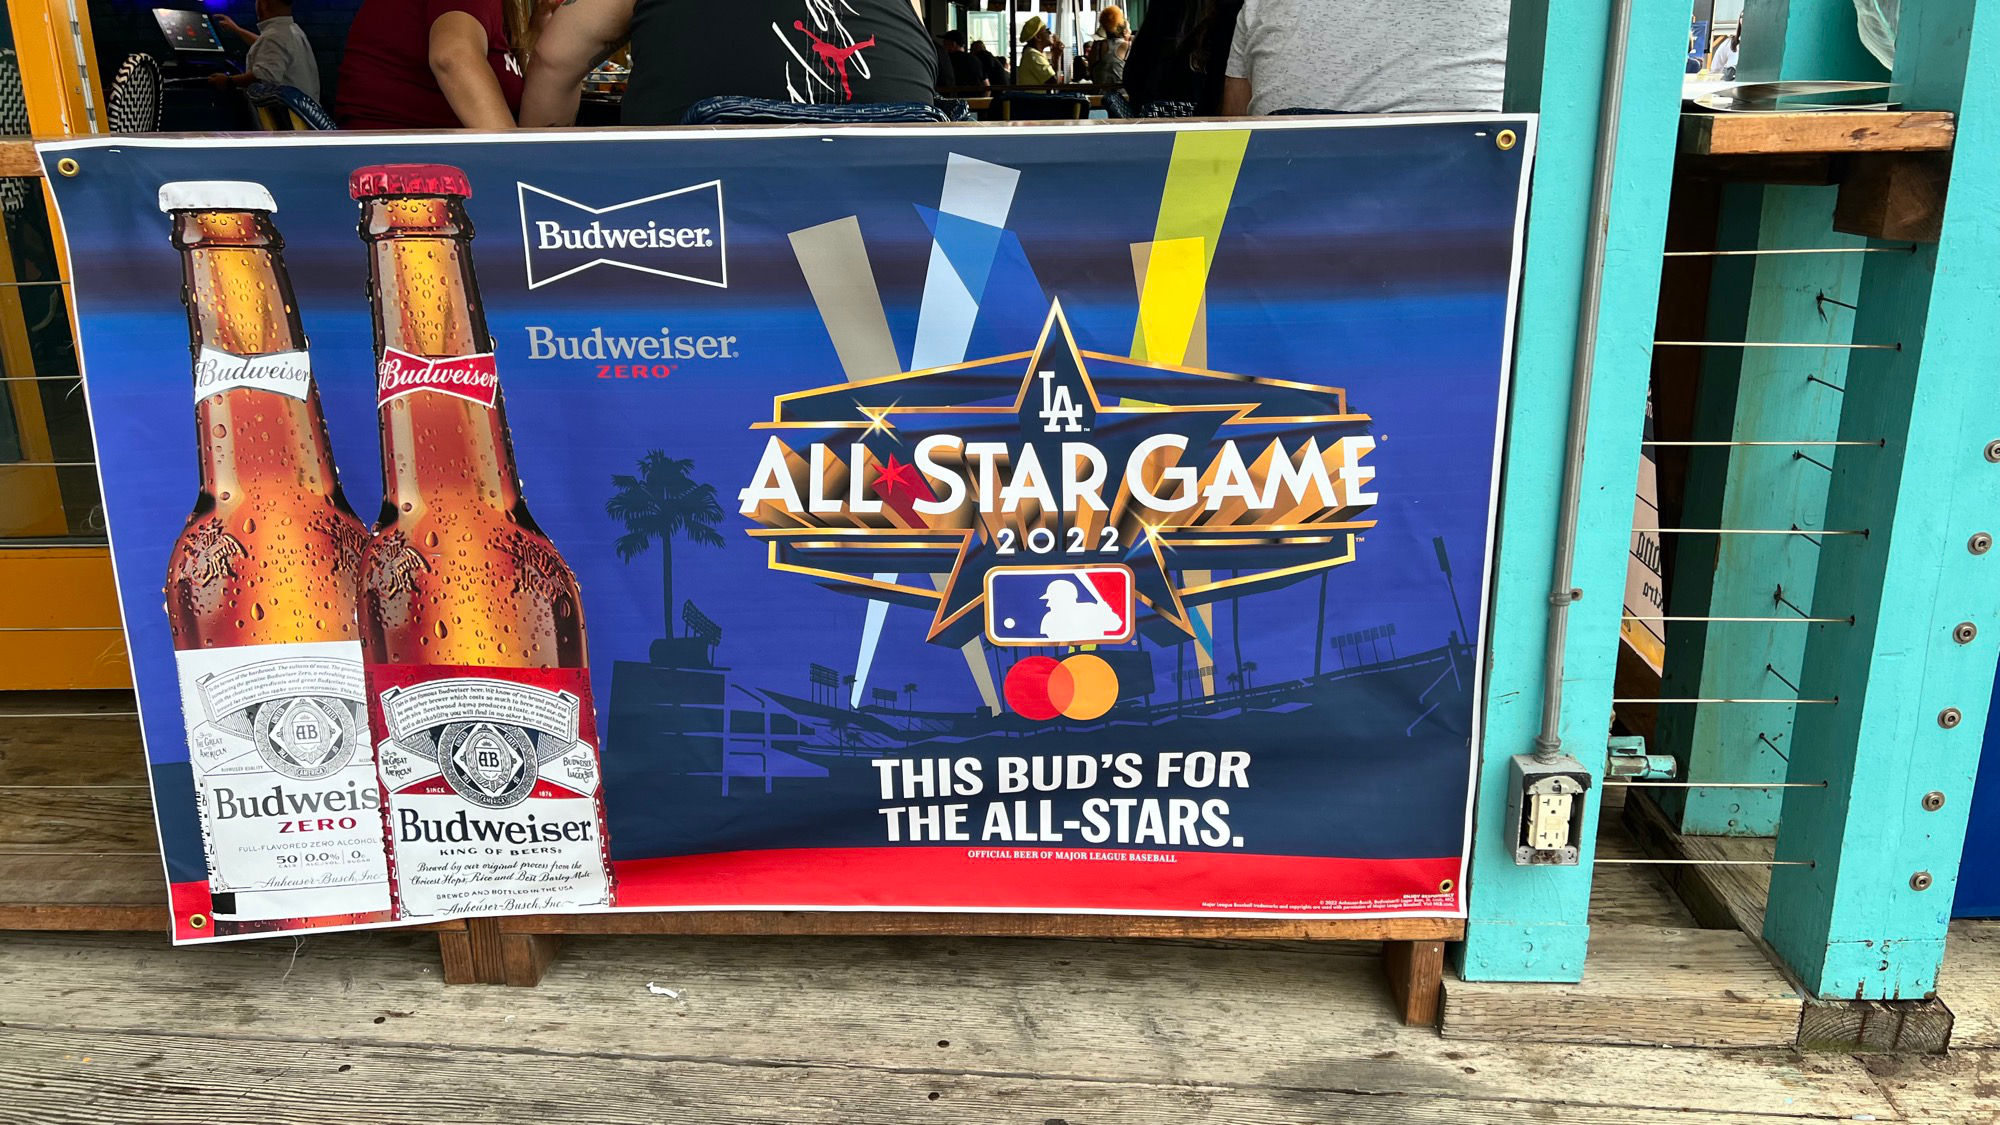 Budweiser This Bud's for the All-Stars